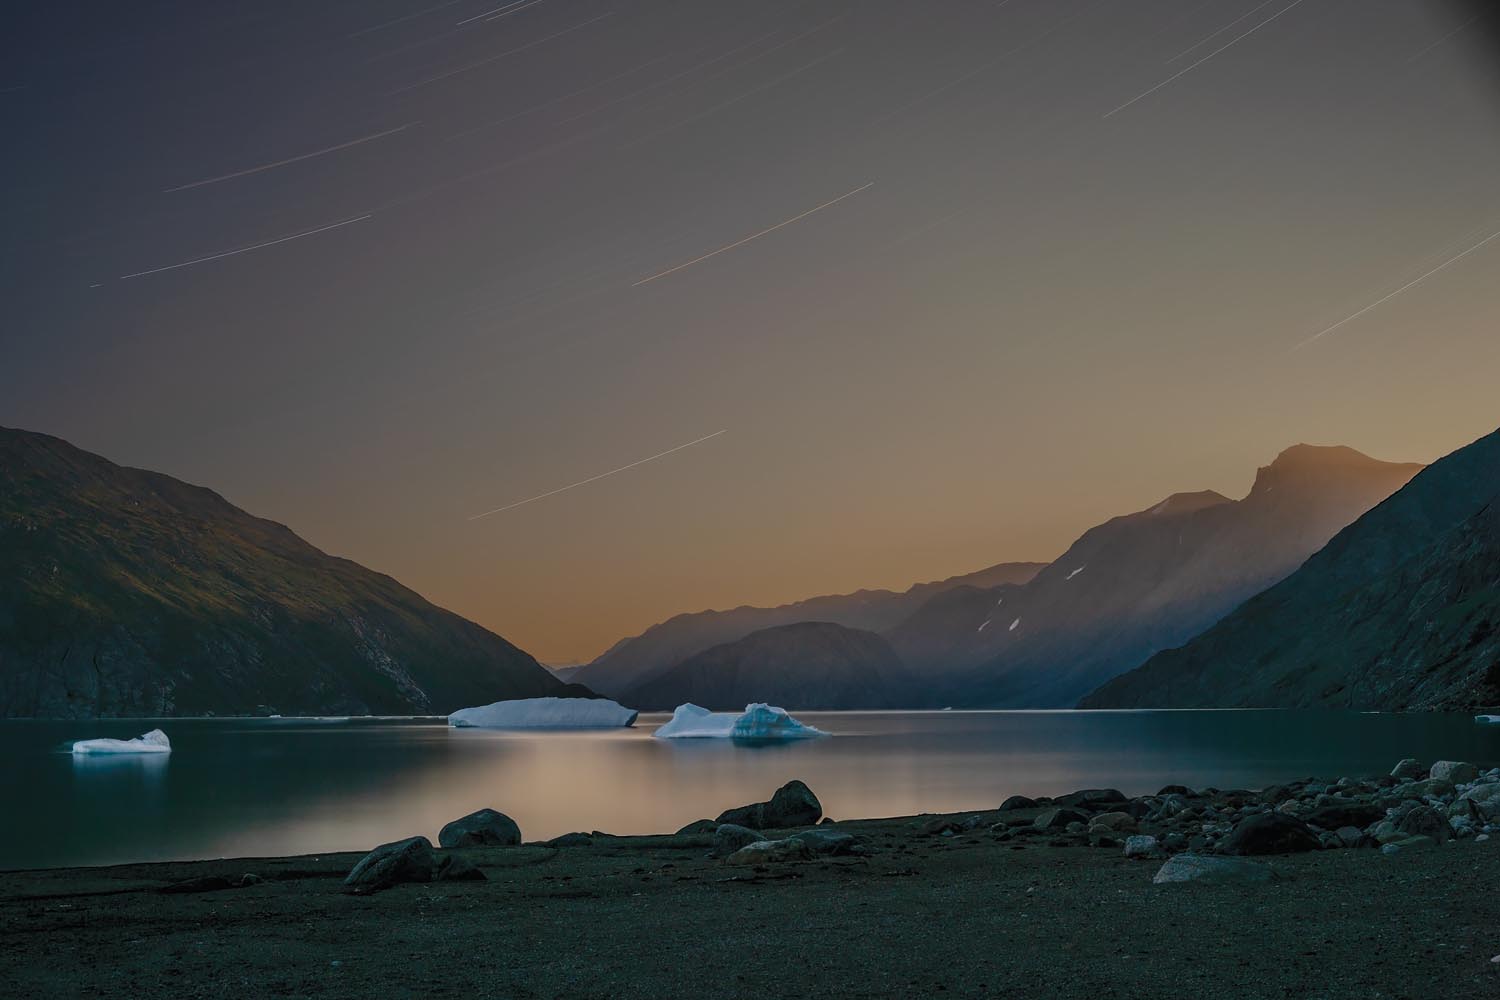 Shadow and Light: New Night Landscape Photographs of Greenland By Steve Giovinco. Yellow Sky Over the Fjord